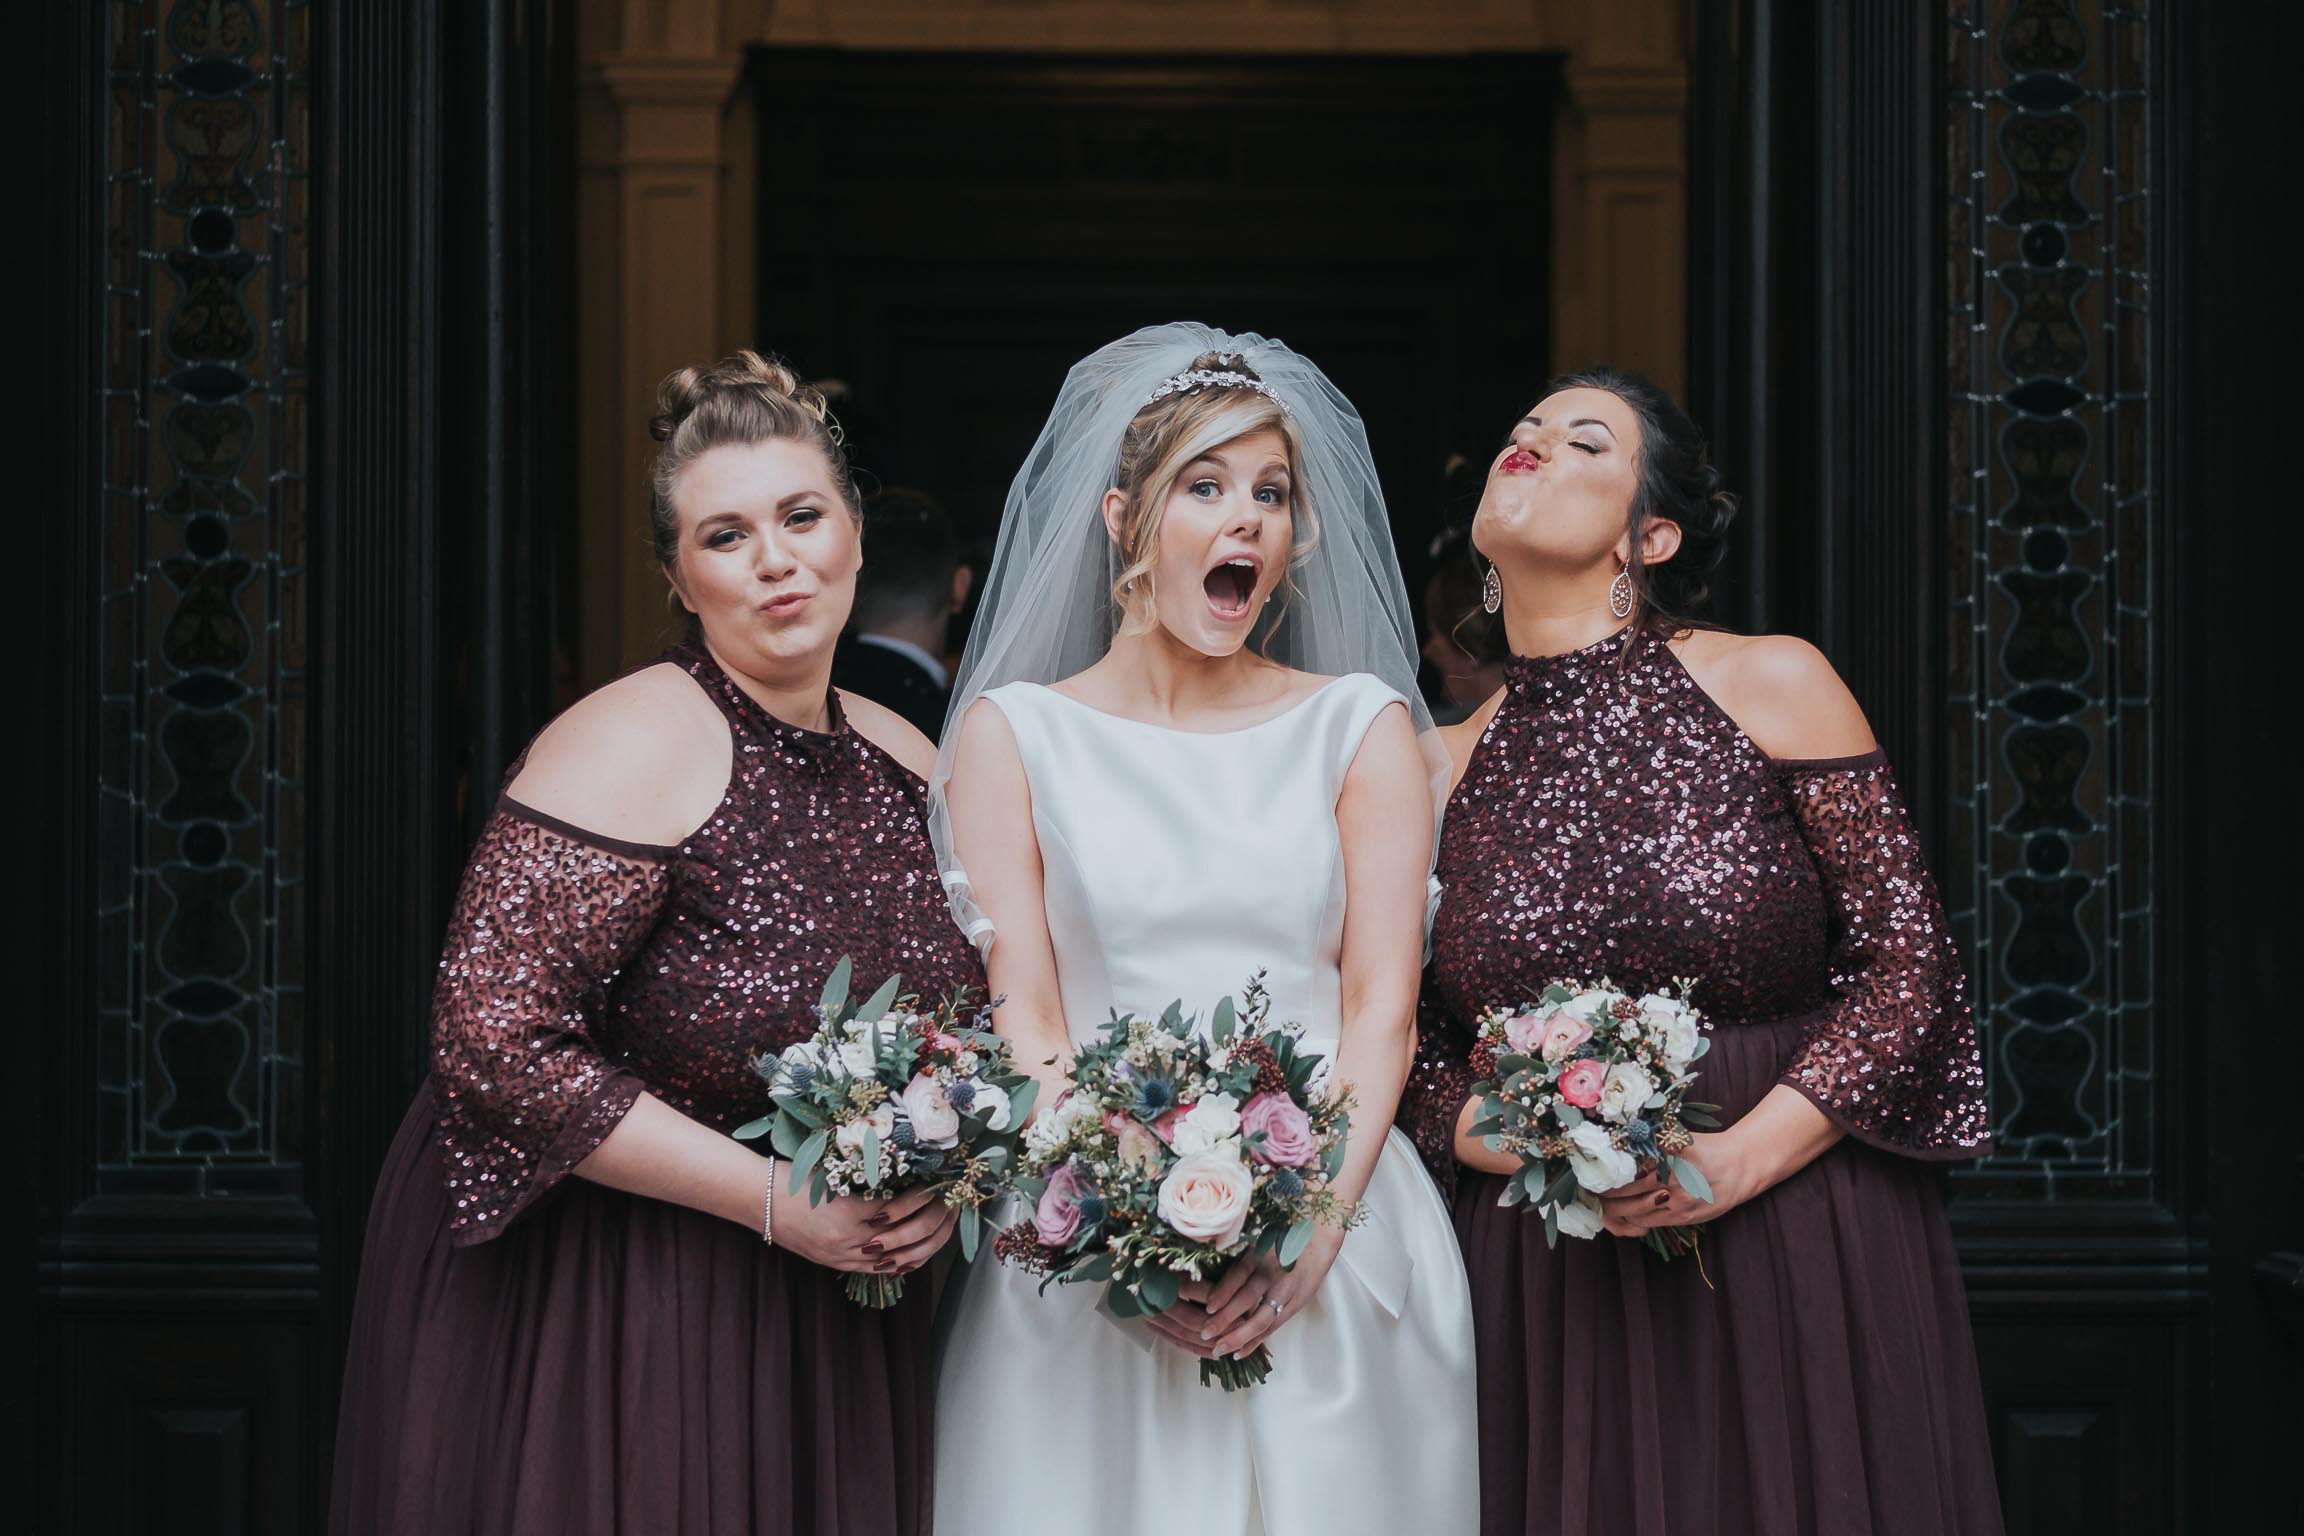 the bride and bridesmaids during their wedding day making funny faces